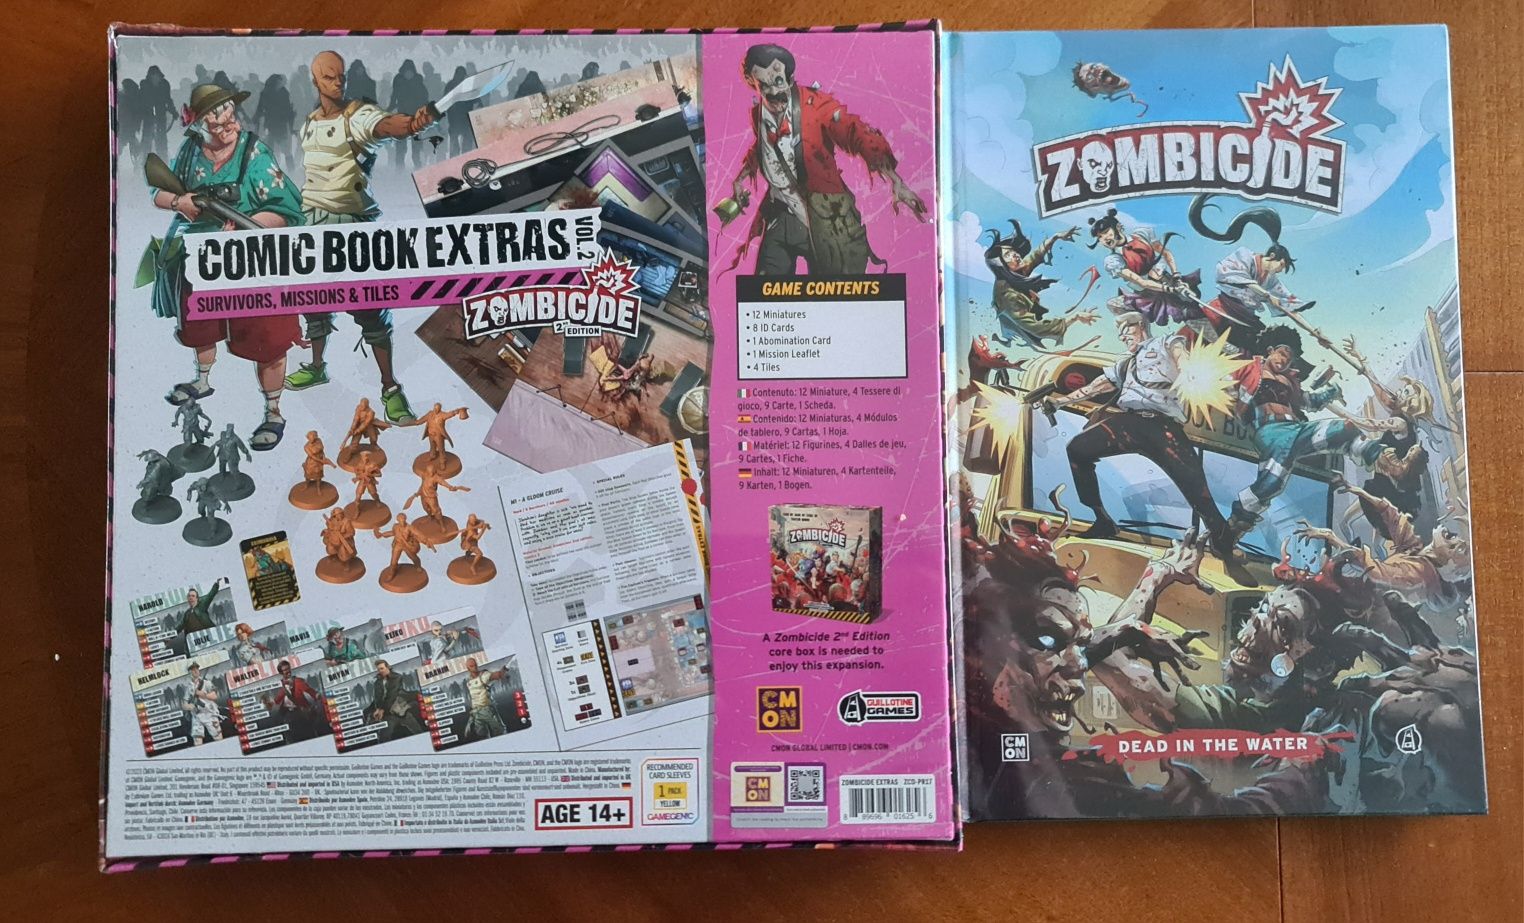 Zombicide 2nd Comic Book Extras Vol. 2